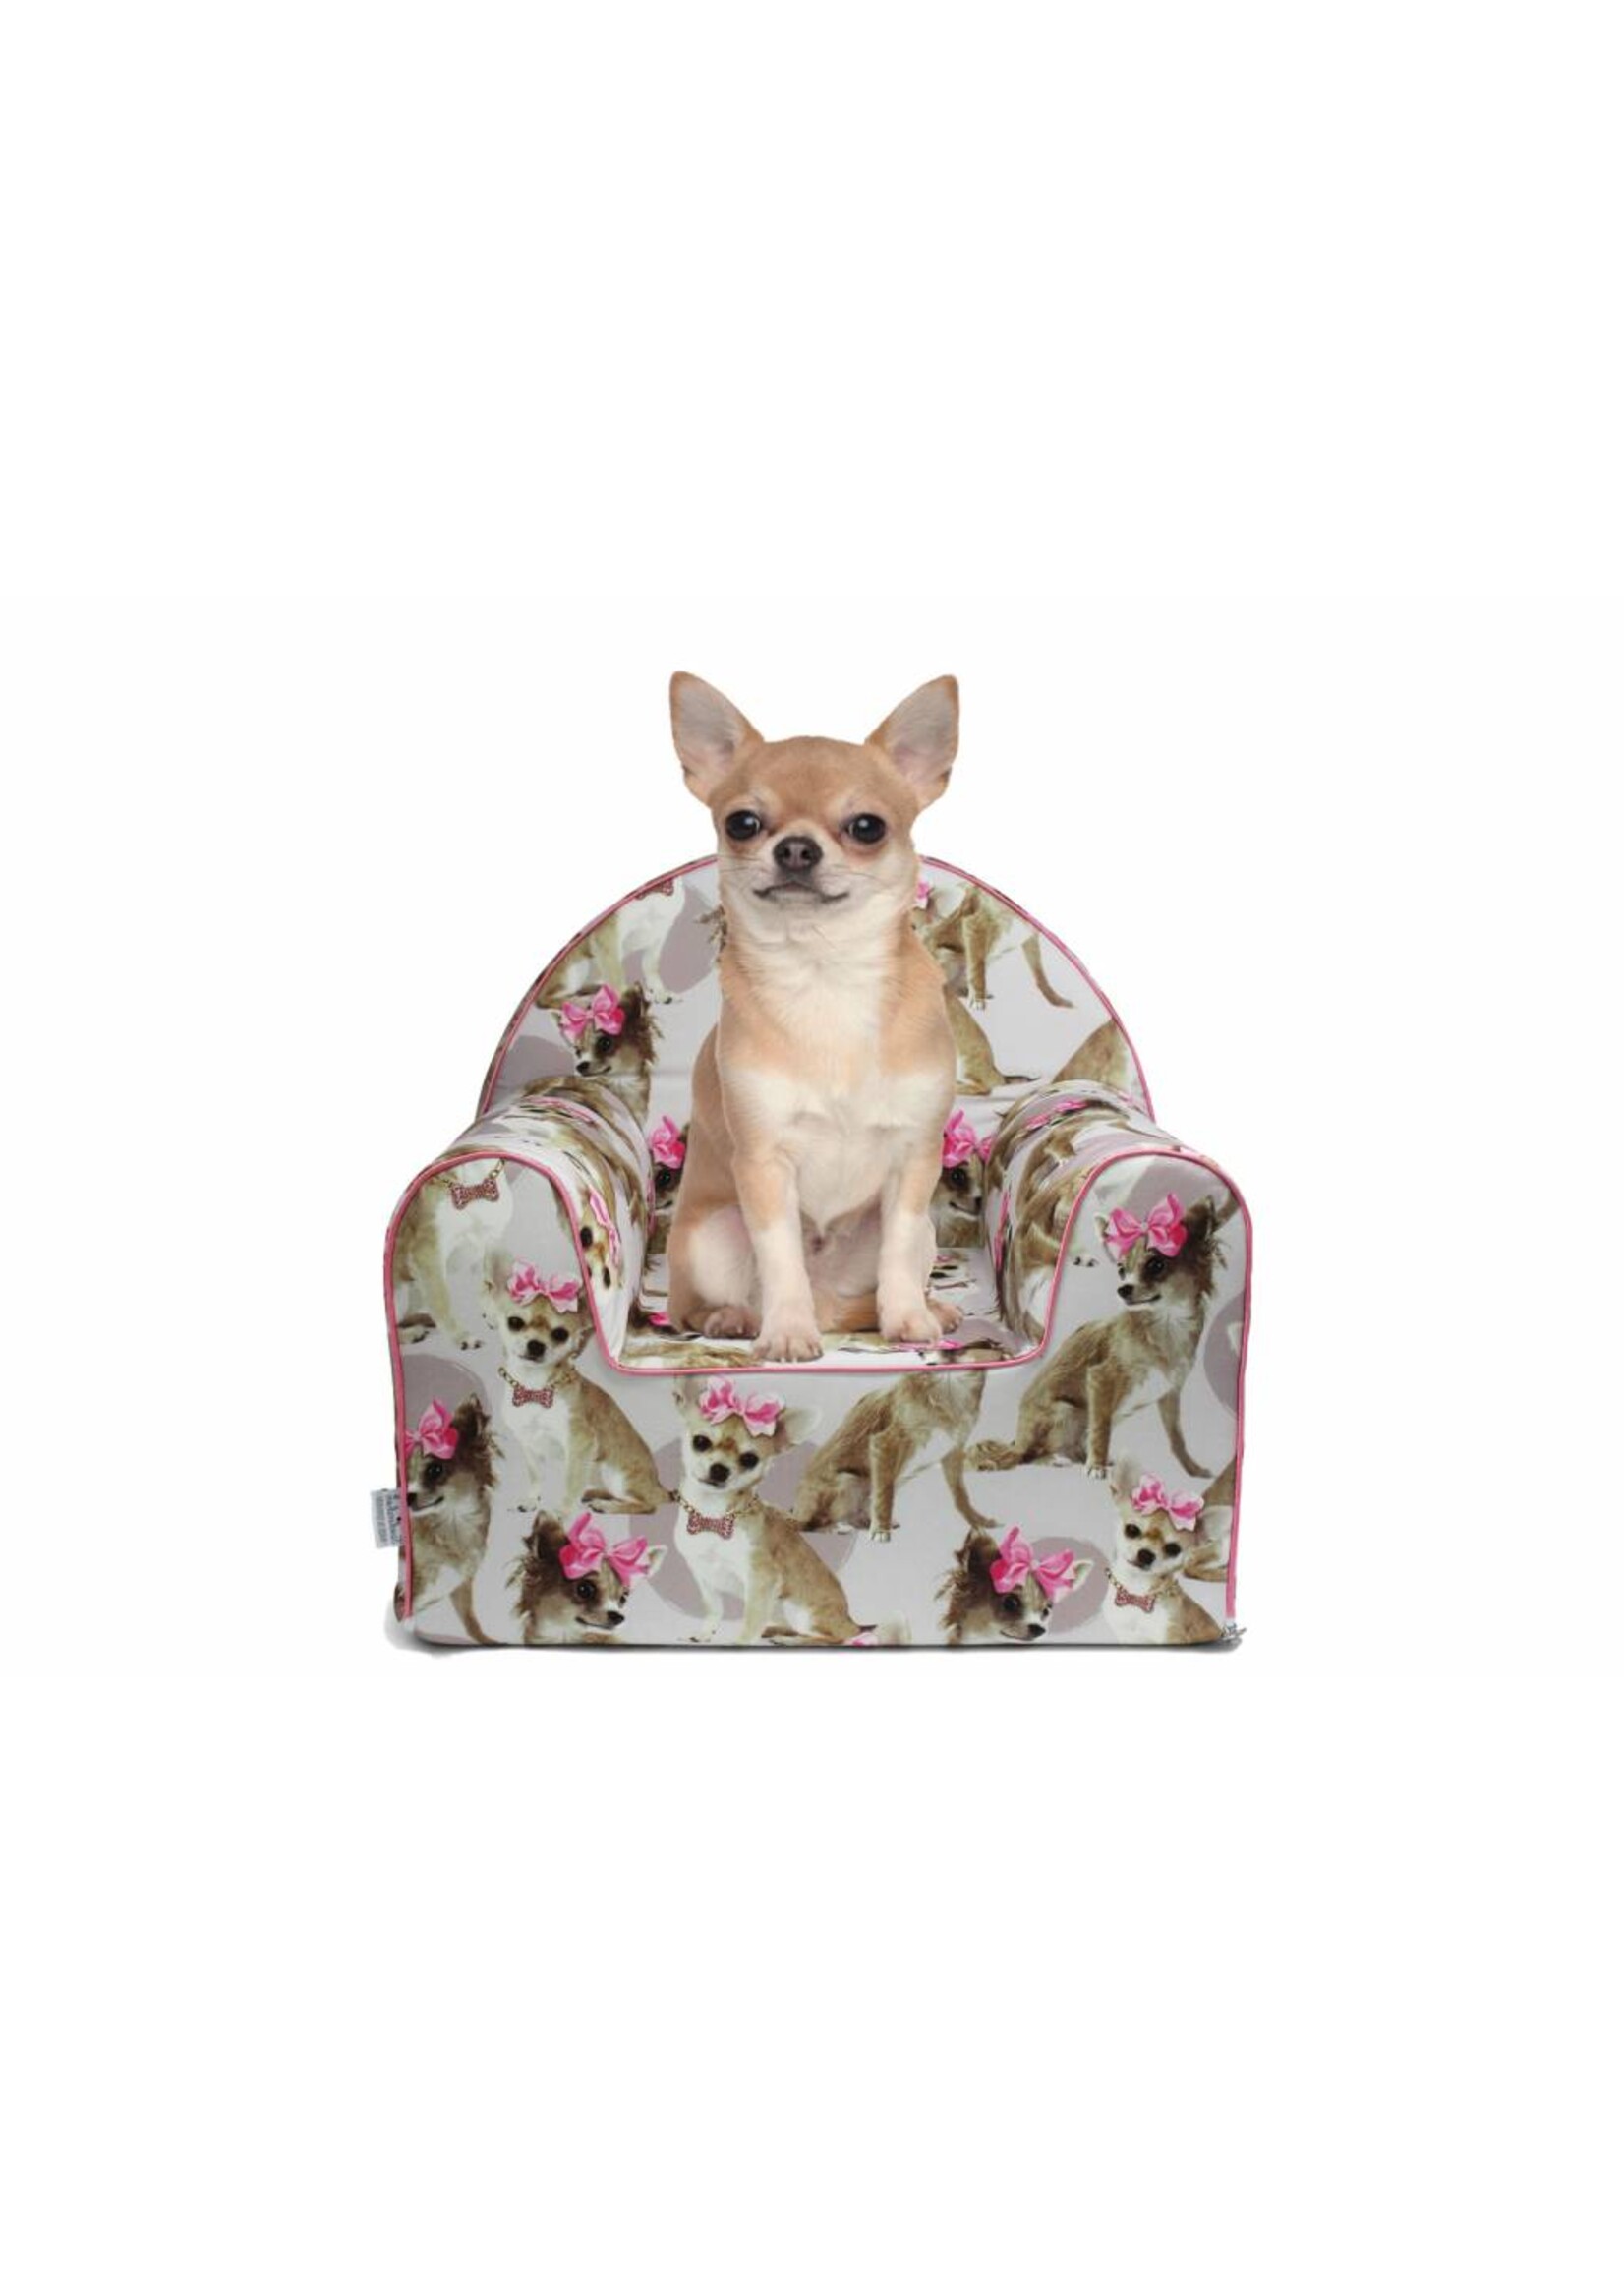 Little Chic by TAVO Little Chic by TAVO Hundesessel PinkyBell Chihuahua Sessel Hundebett